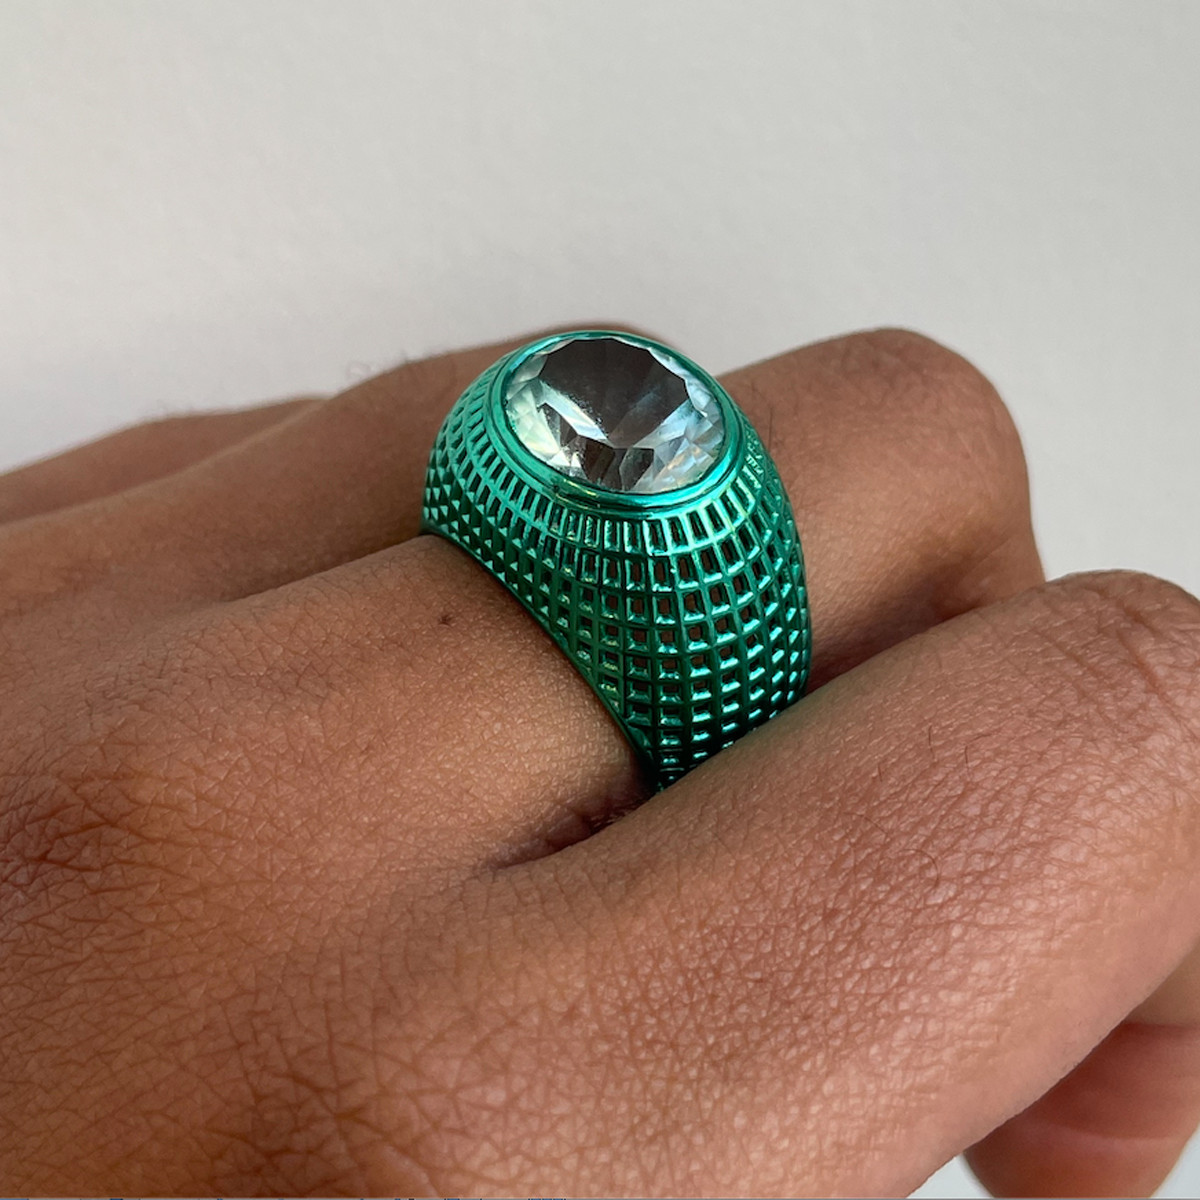 The Beam Art Ring by Lynne Maclachlan available at tomfoolery London as a part of Art Ring 2022 exhibition.